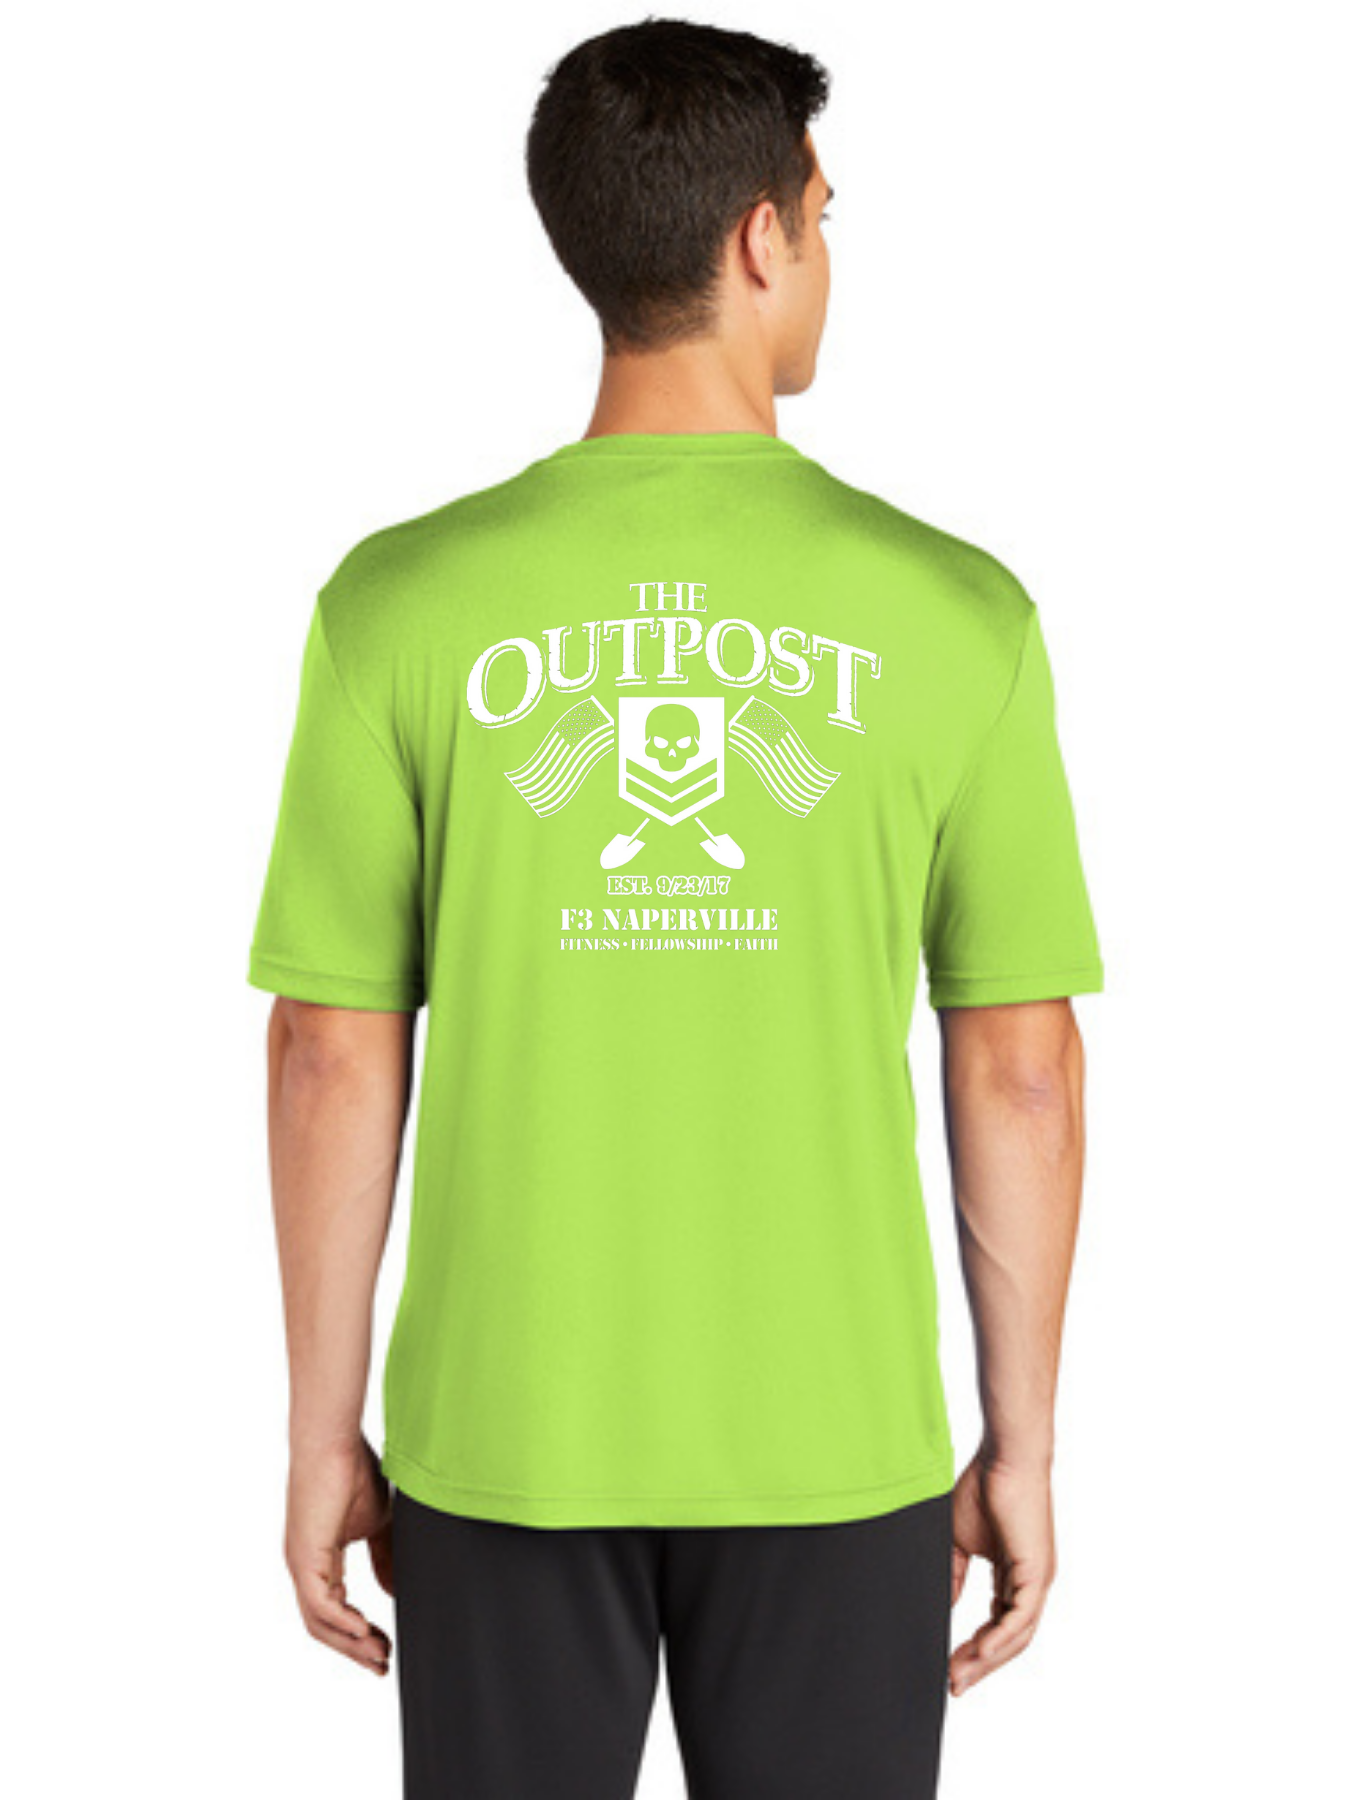 F3 Naperville The Outpost Pre-Order May 2022